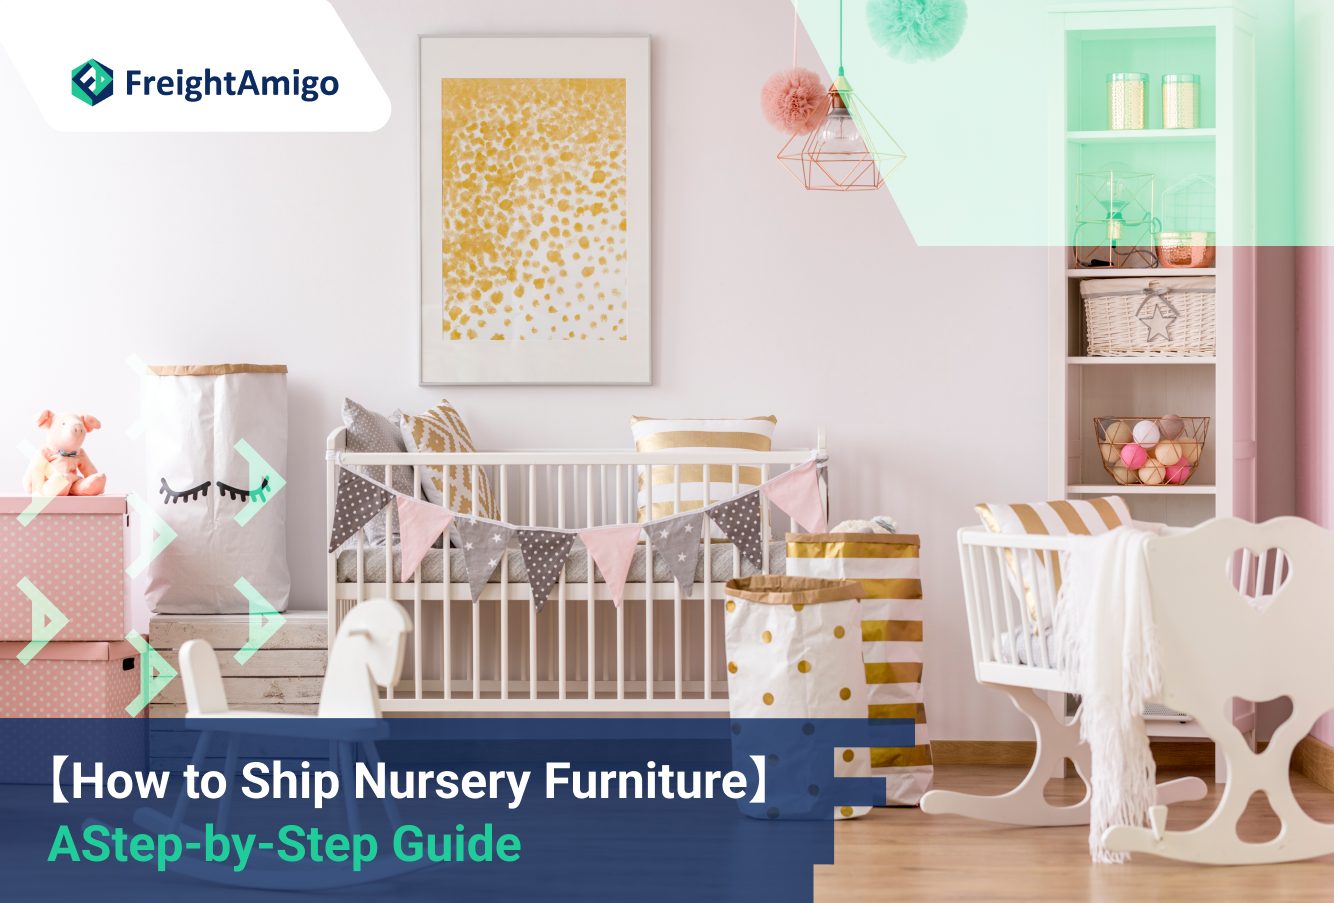 【How to Ship Nursery Furniture】A Step-by-Step Guide